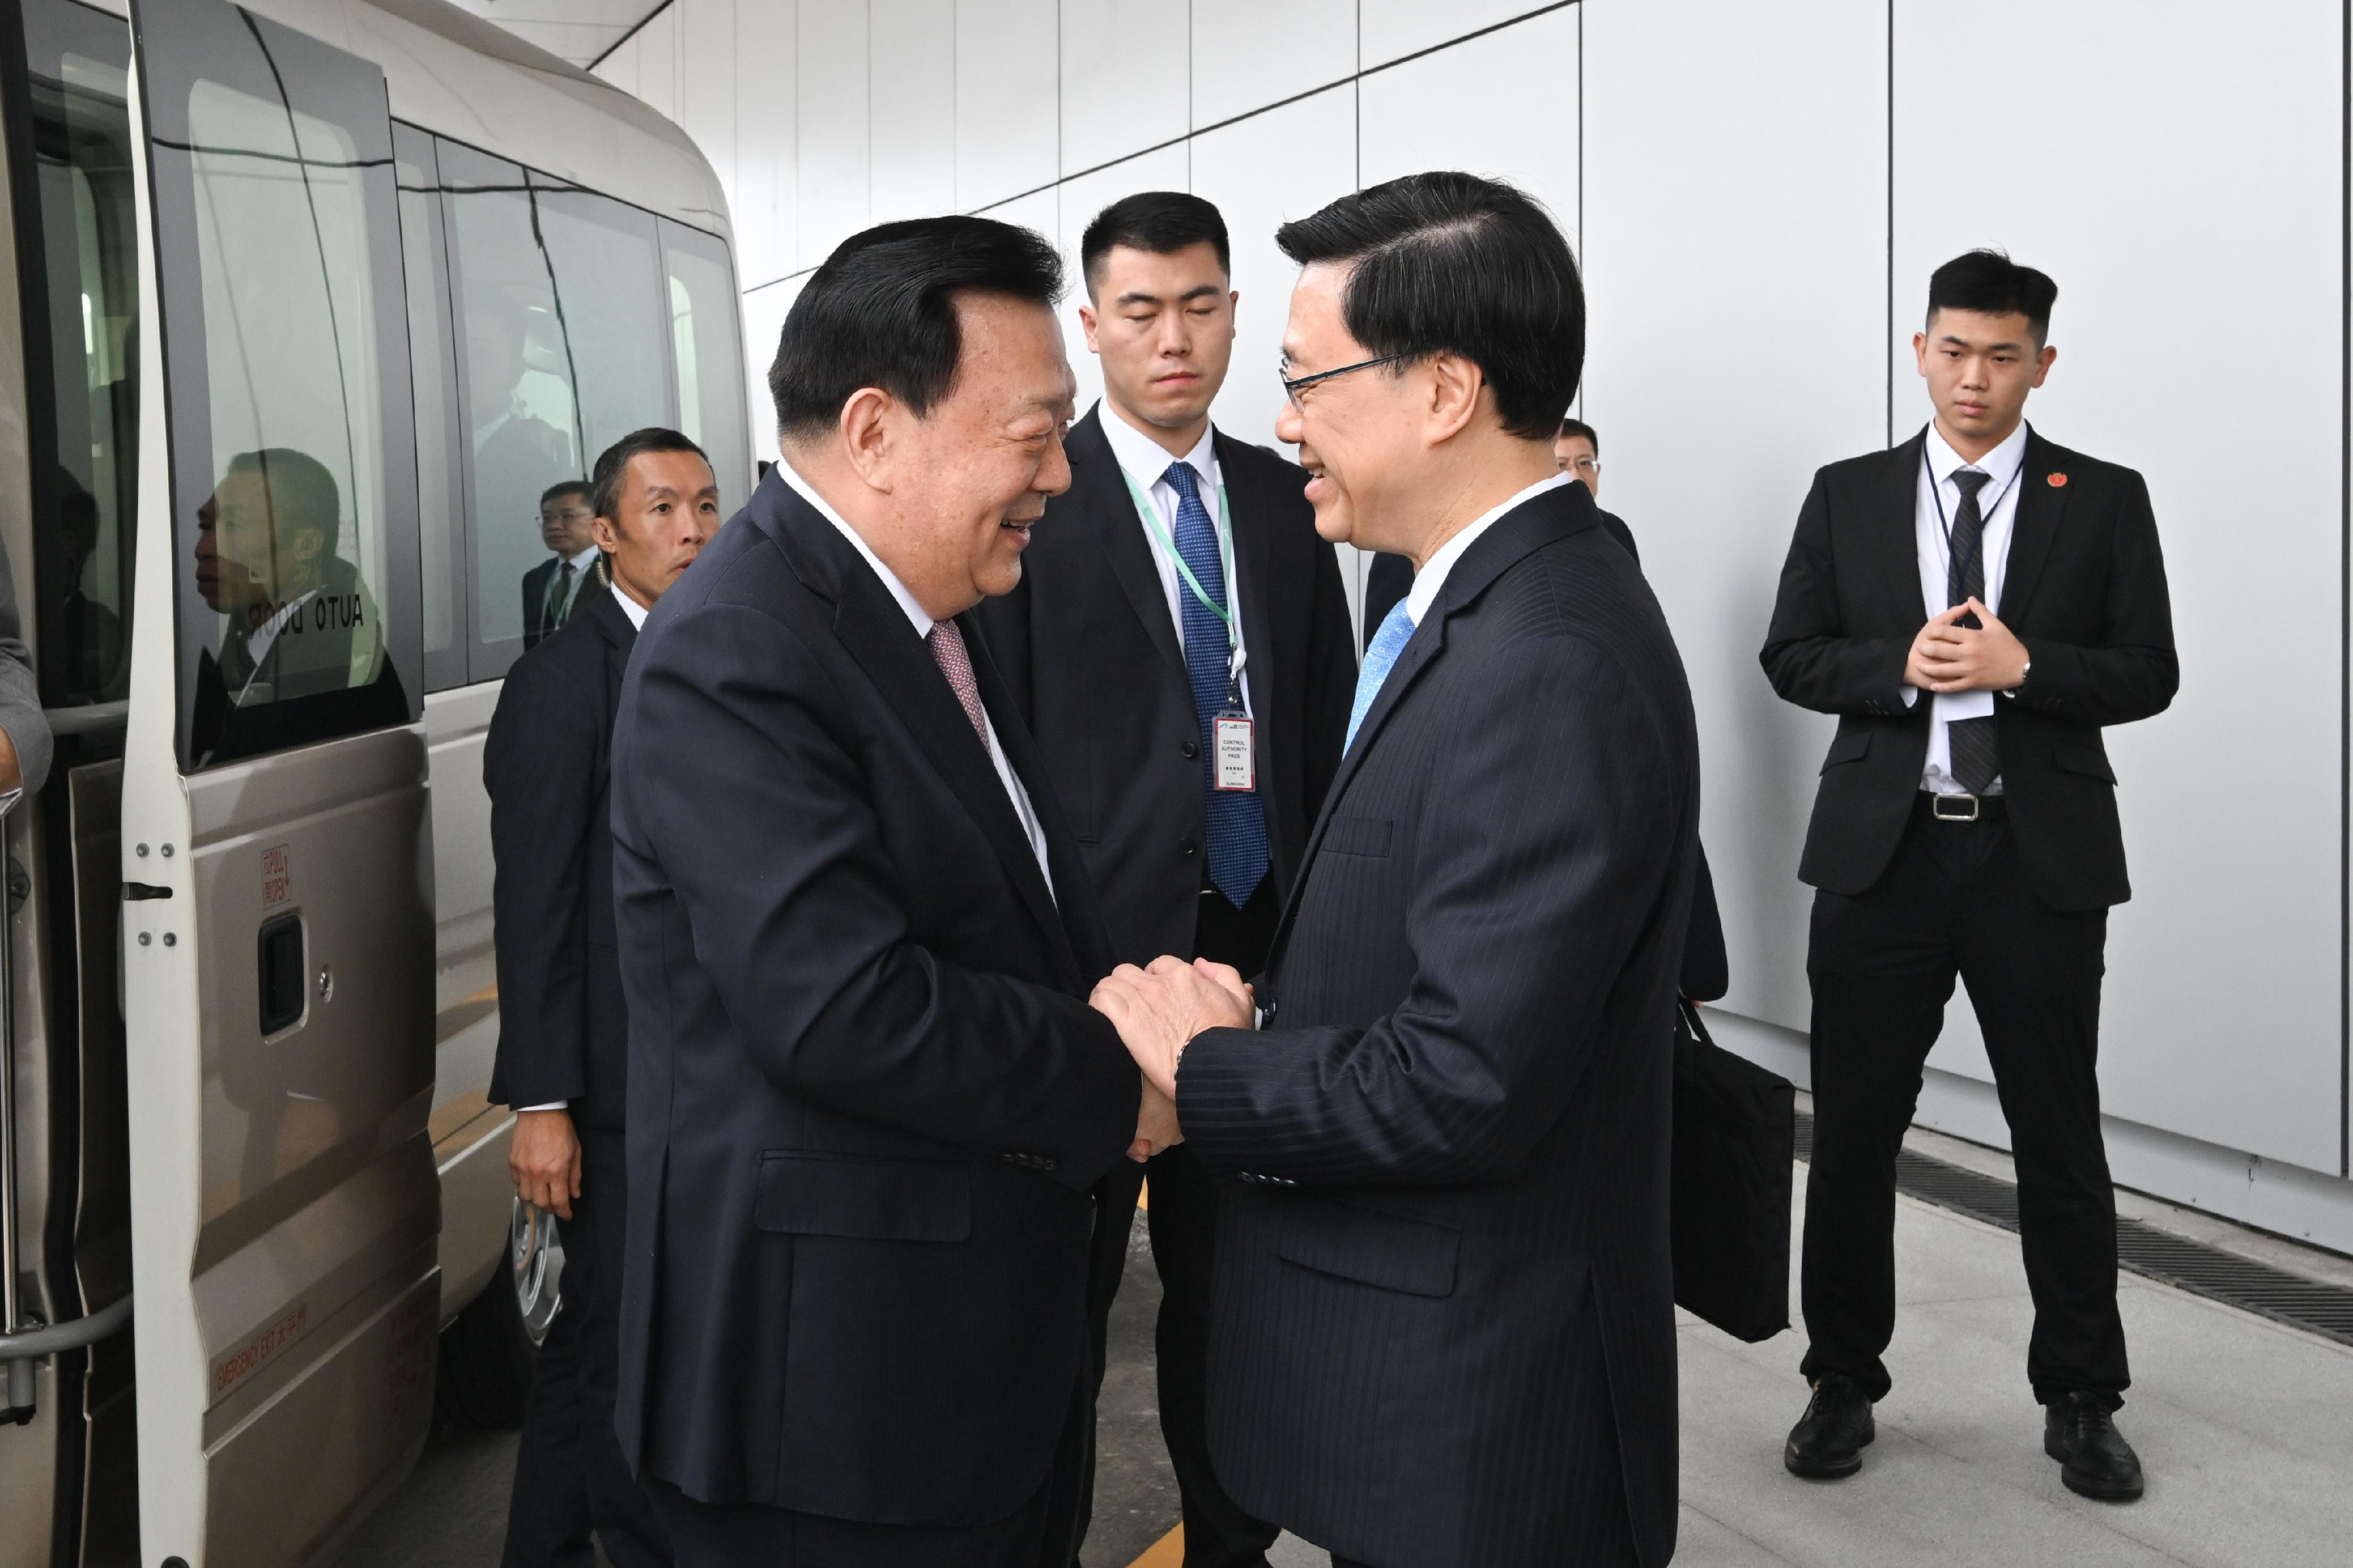 The Director of the Hong Kong and Macao Work Office of the Communist Party of China Central Committee and the Hong Kong and Macao Affairs Office of the State Council, Mr Xia Baolong, arrived in Hong Kong for his seven-day inspection visit today (February 22). Photo shows Mr Xia (first left), accompanied by the Chief Executive, Mr John Lee (second left), visiting the Integrated Airport Centre at Hong Kong International Airport.